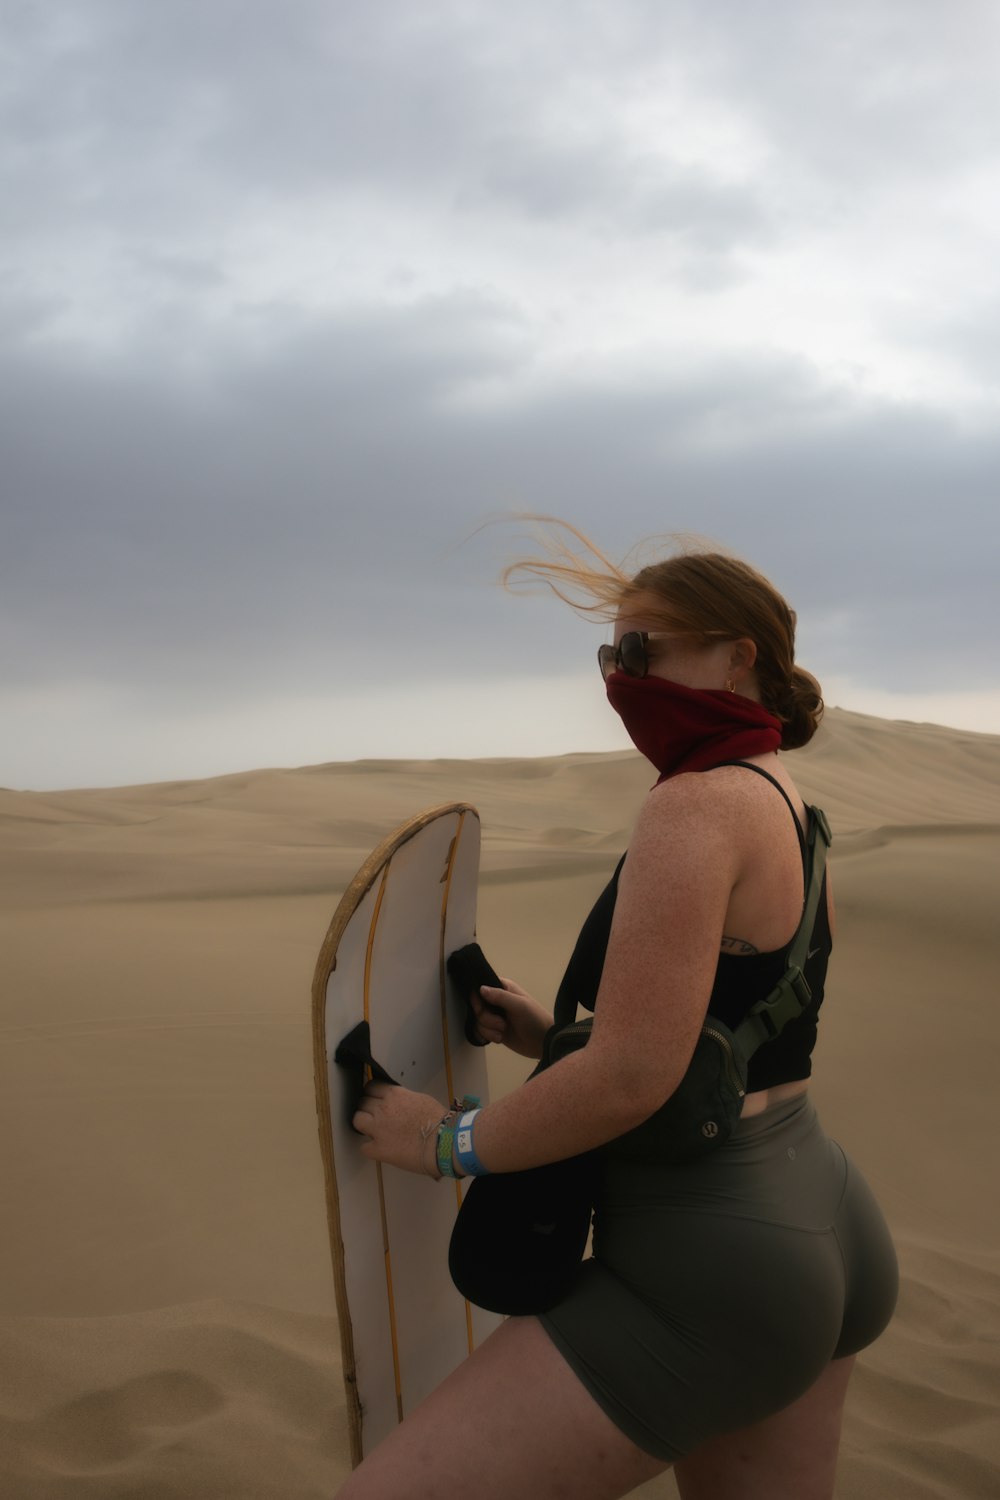 a woman holding a surfboard in the desert